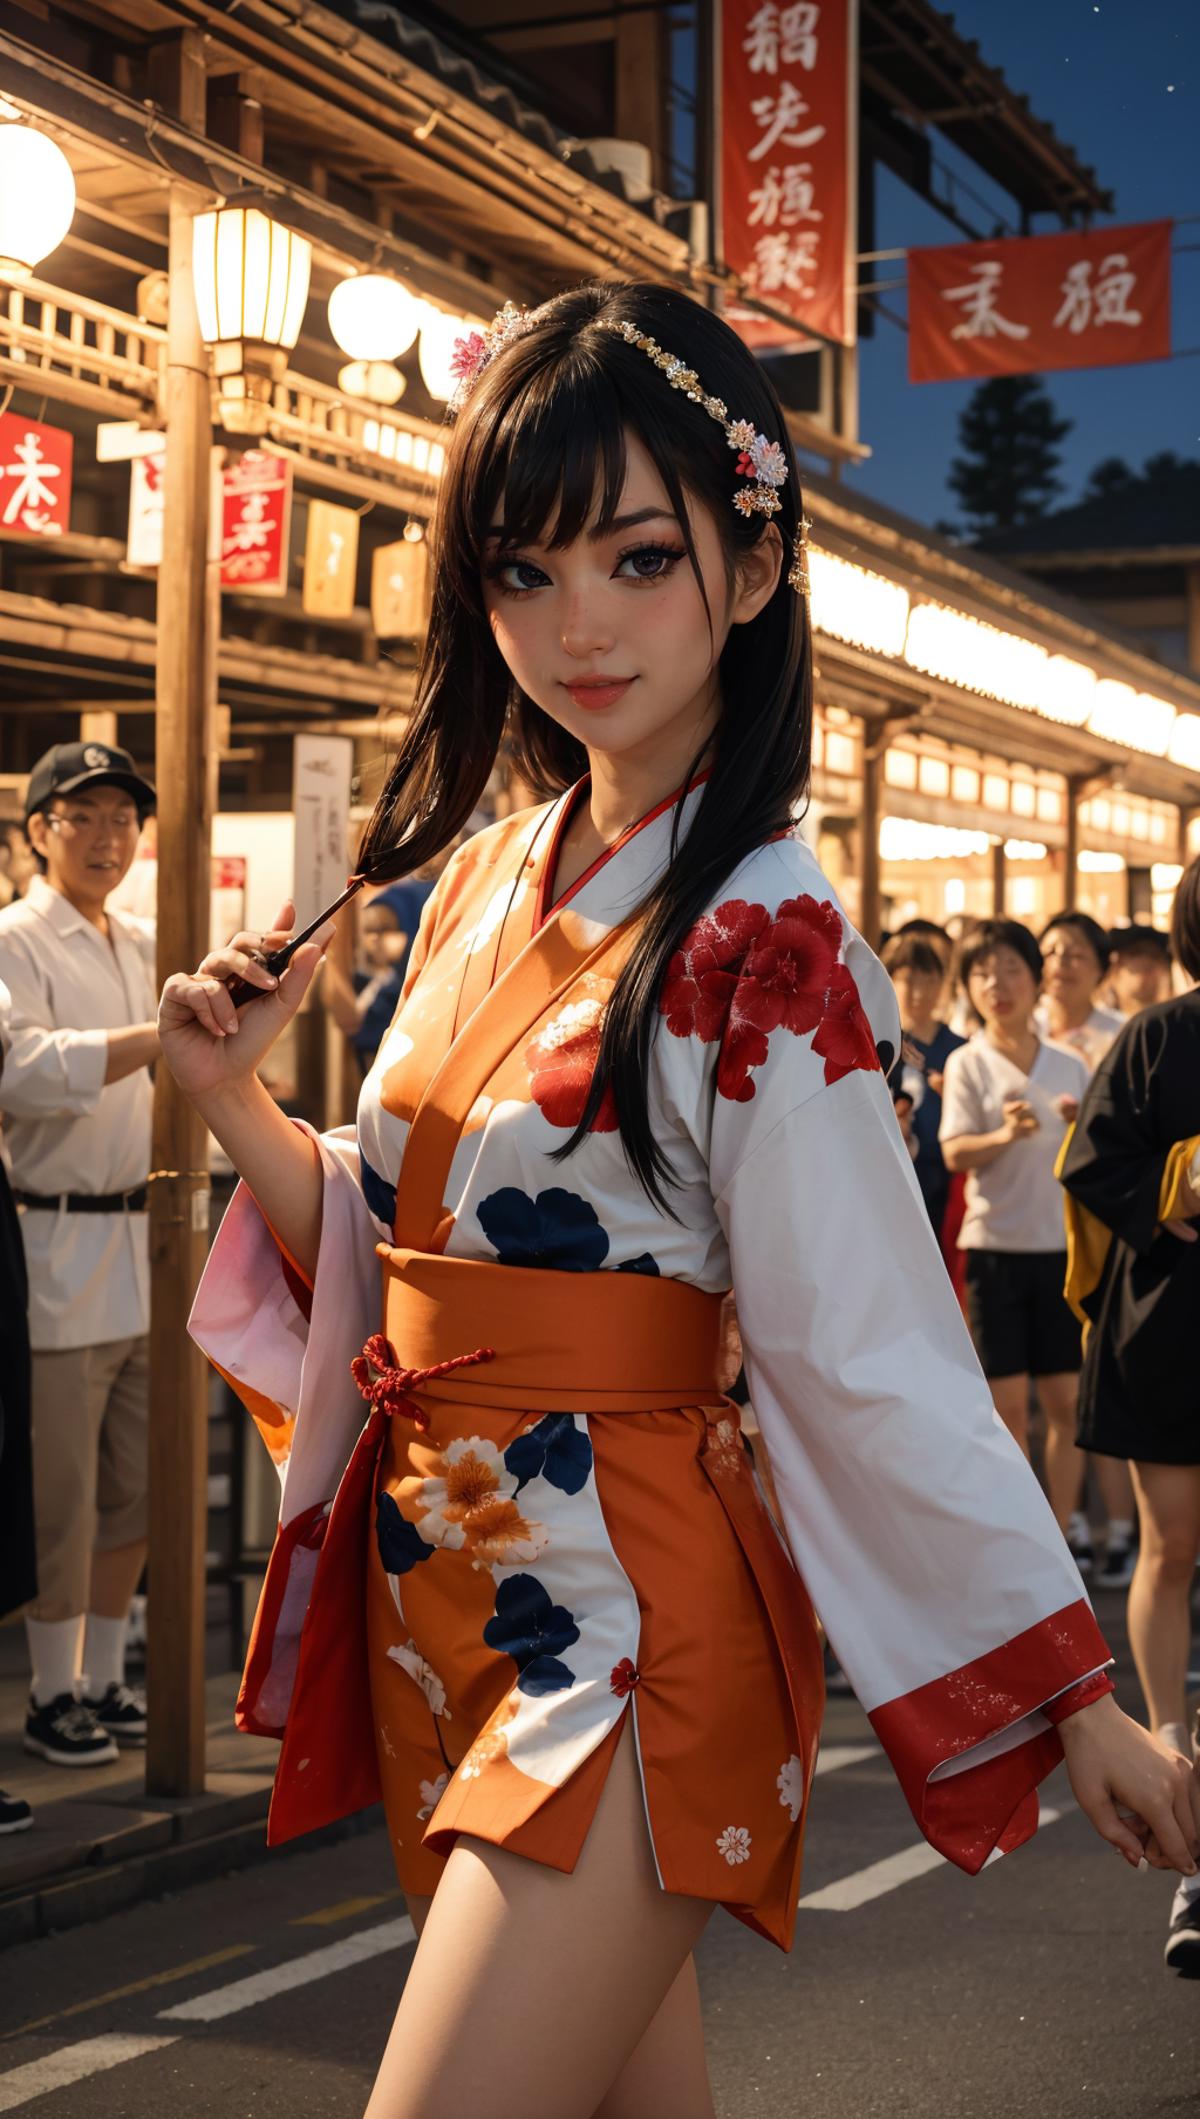 A woman wearing a kimono with a flower design poses for a picture.